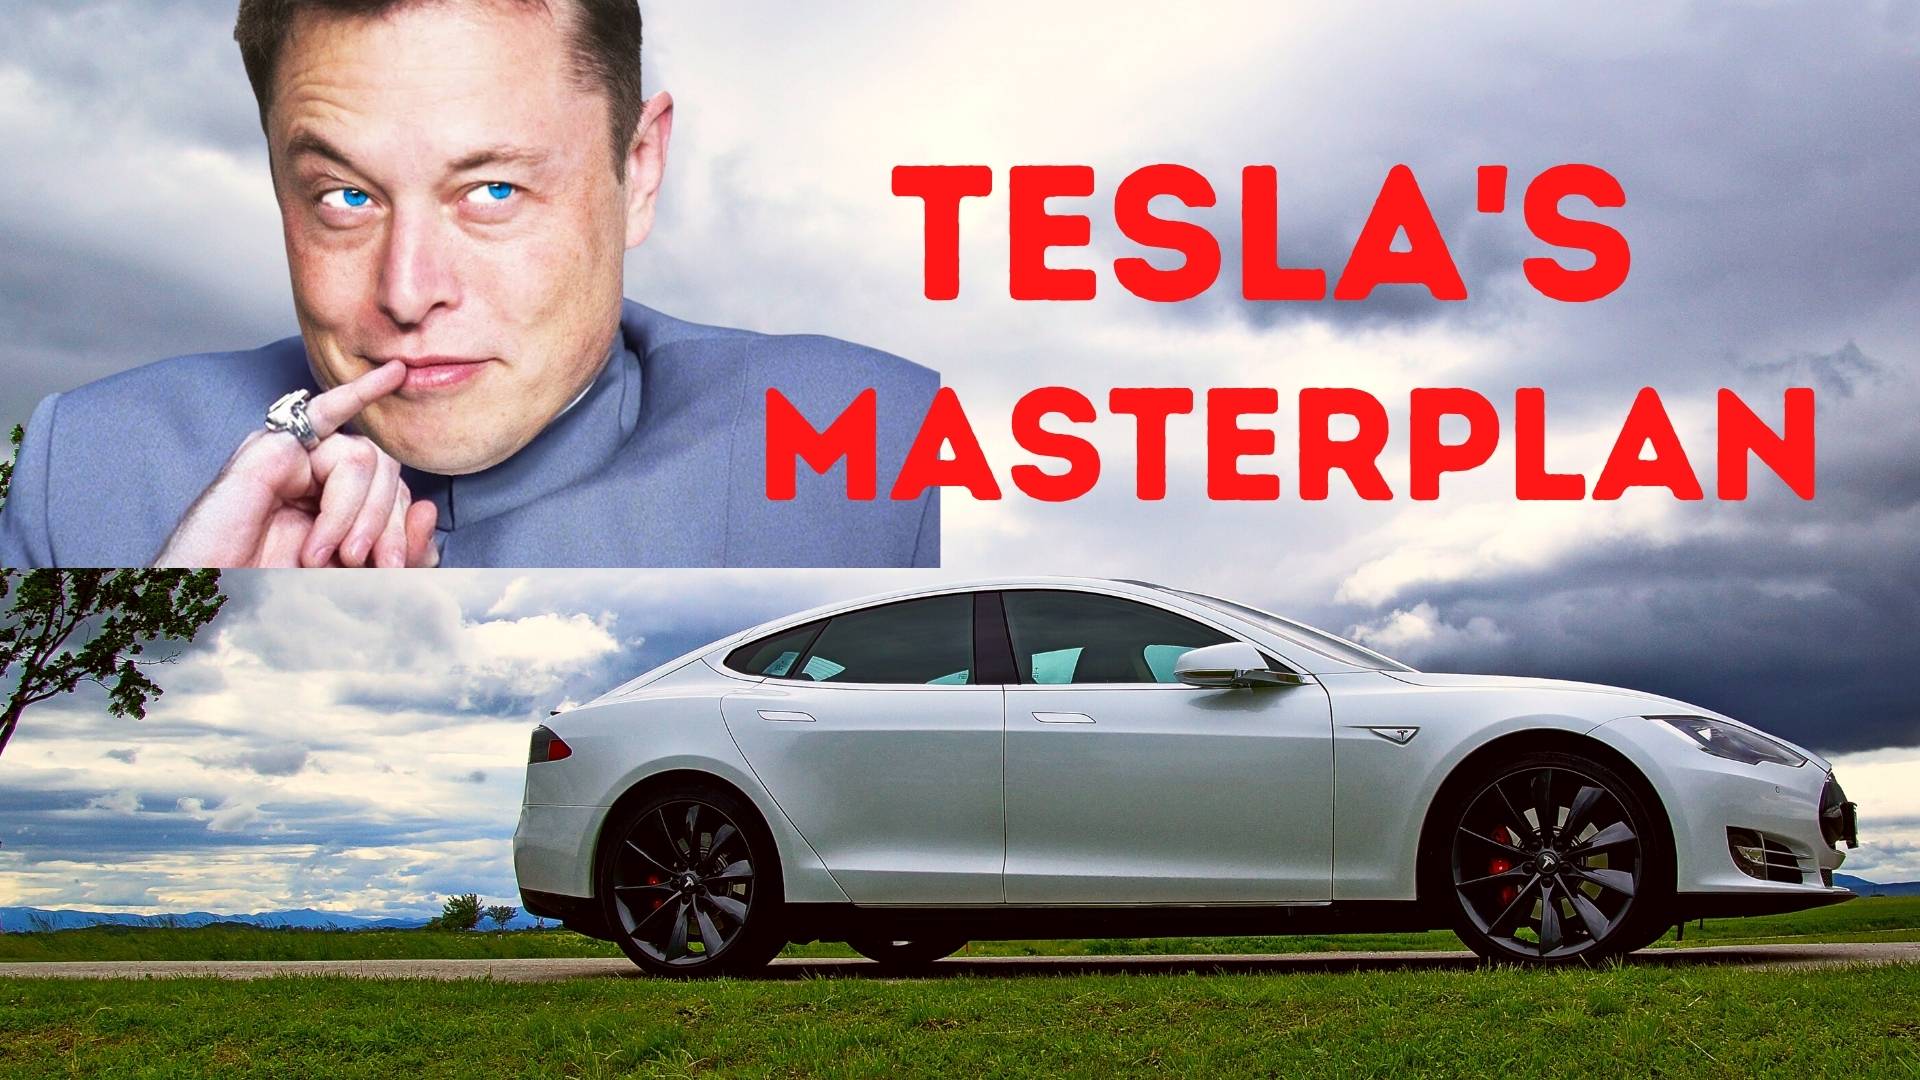 tesla-s-ingenious-plan-for-qualifying-tax-incentives-vehiclesuggest